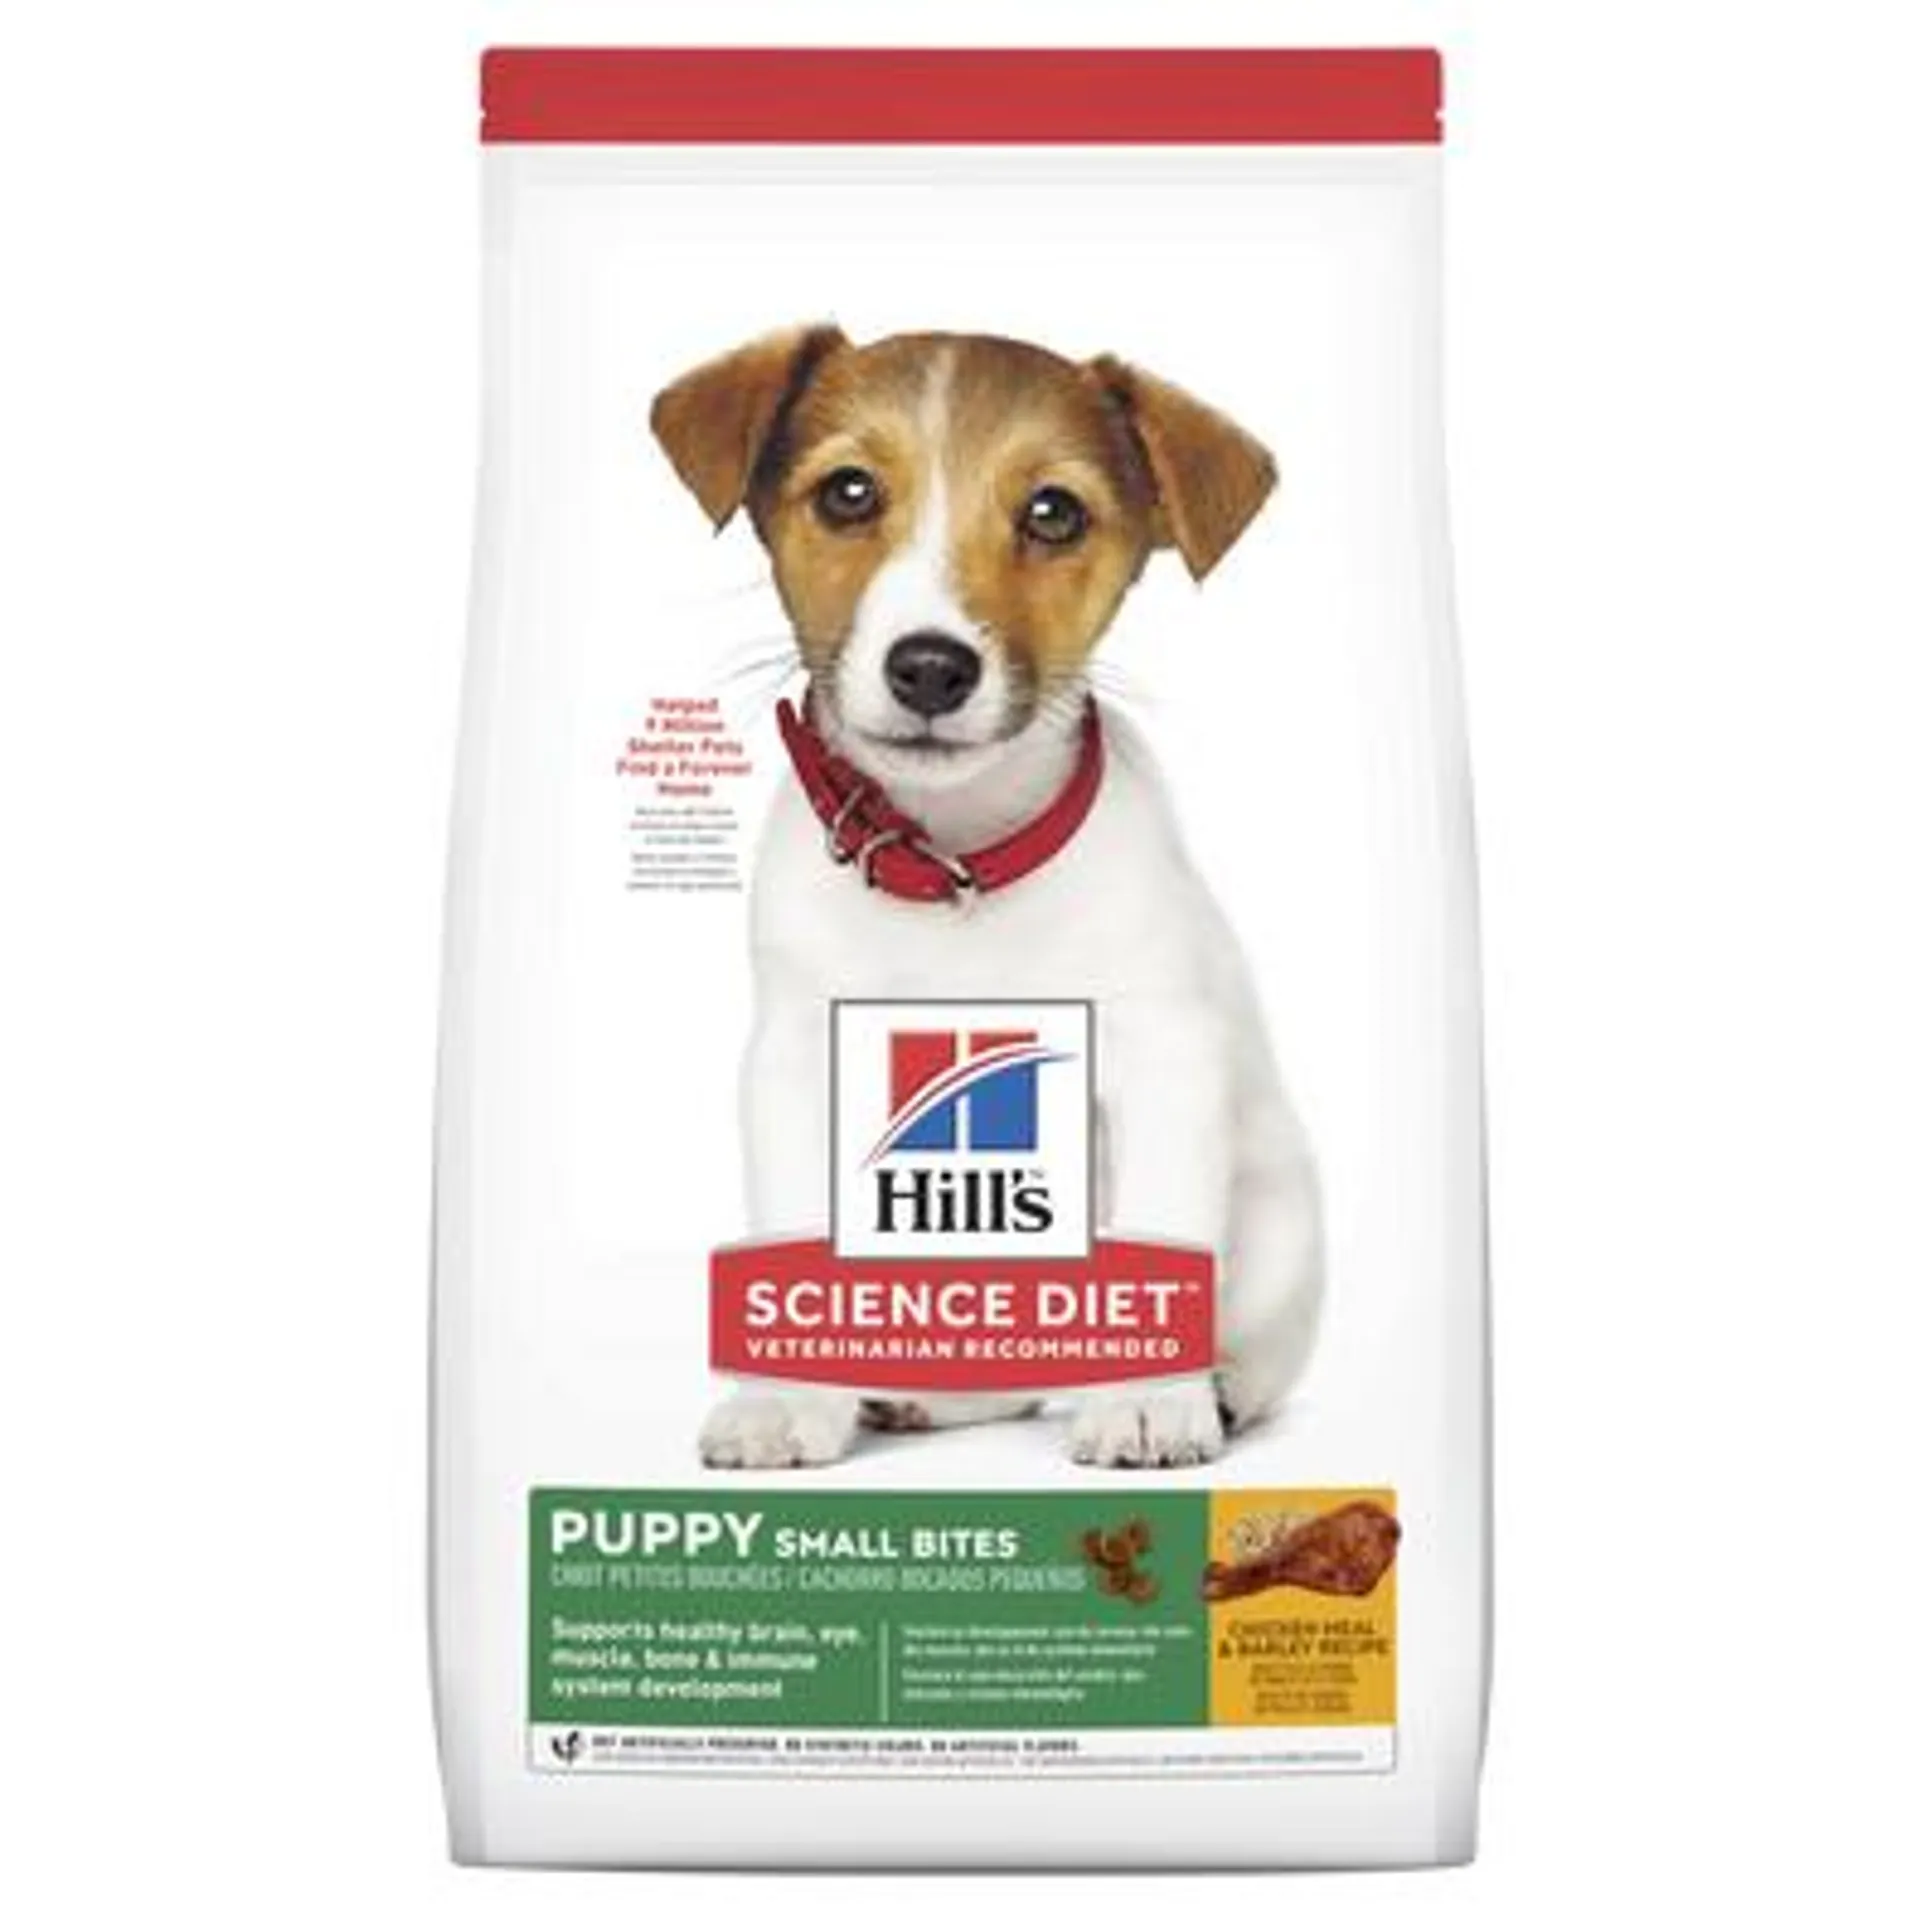 Hill's Science Diet Small Bites Puppy Dry Dog Food